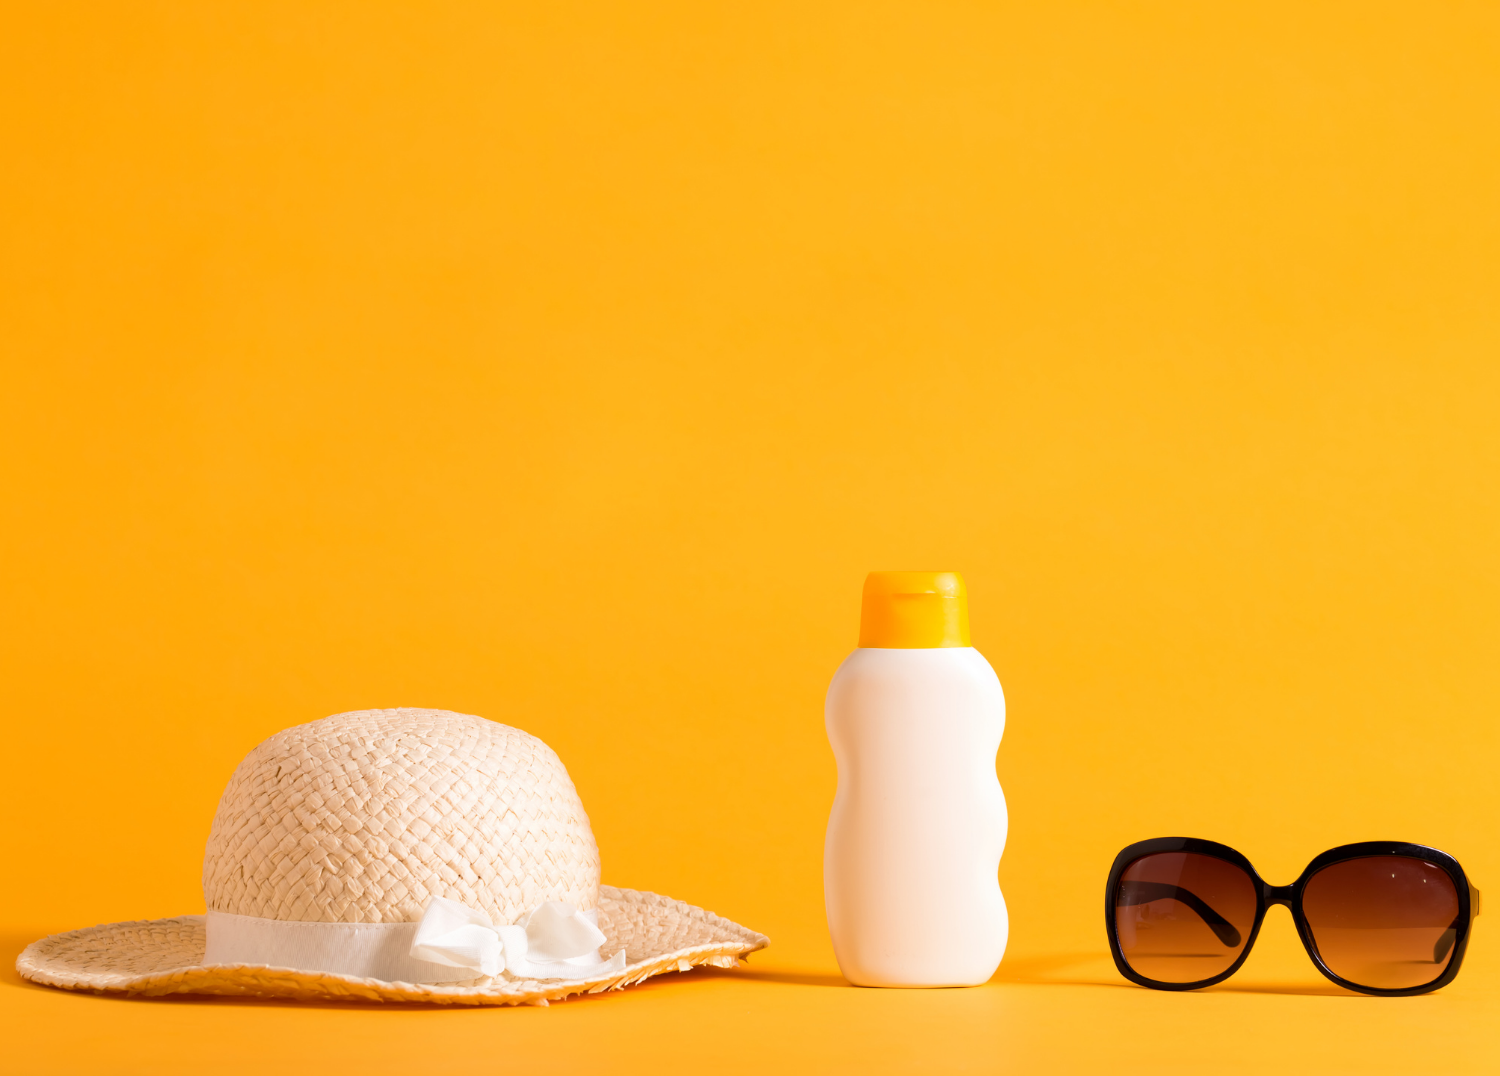 Items to Protect the Skin from Sun Damage